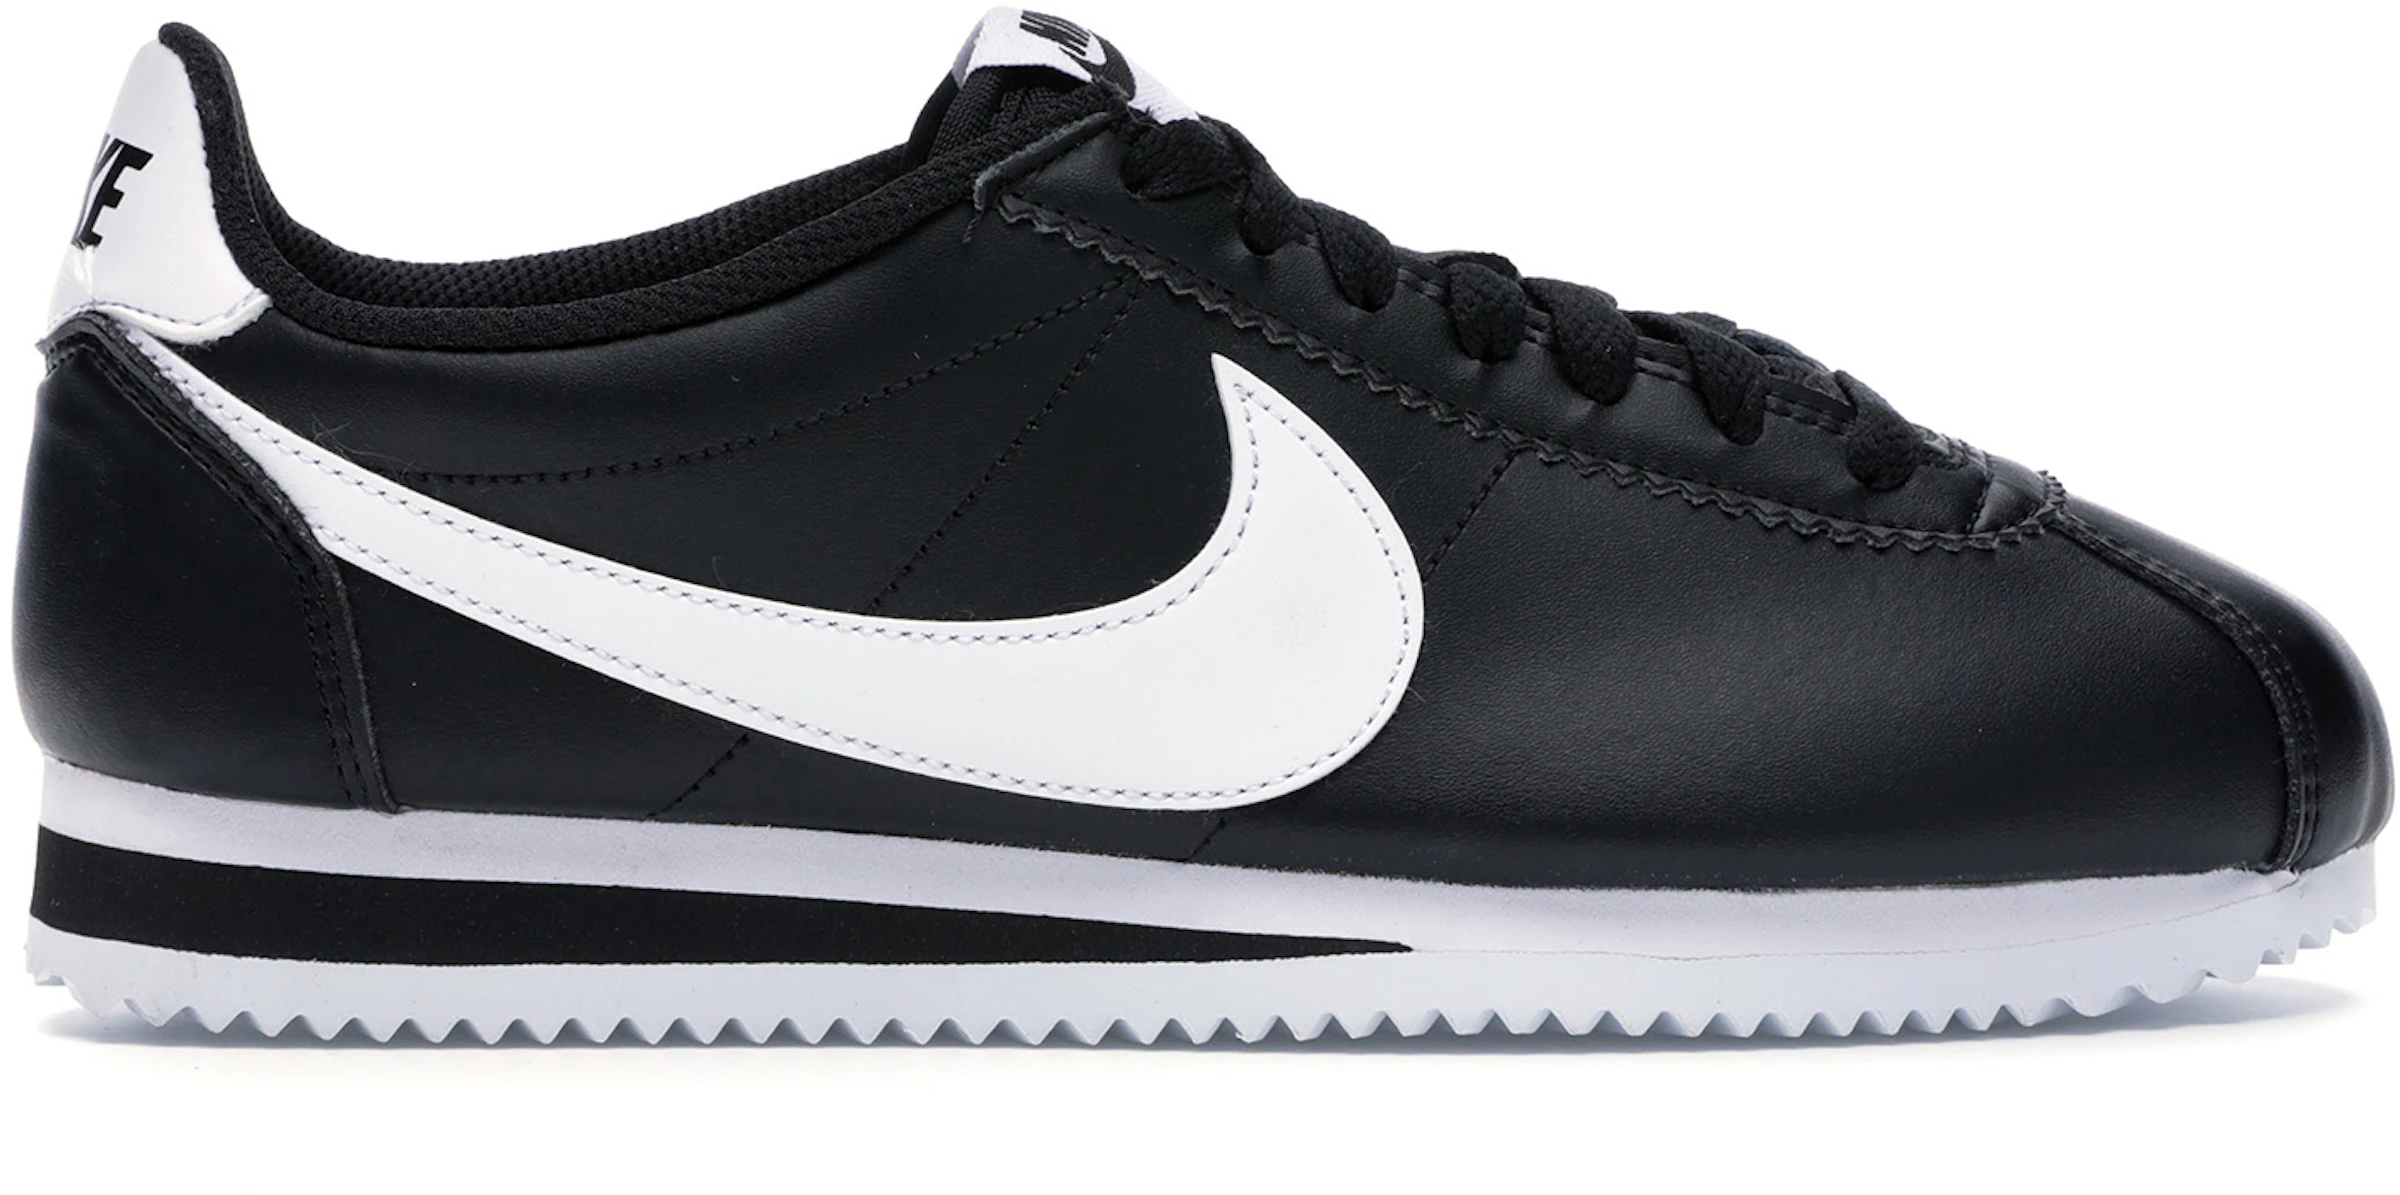 Cortez for Men and Women StockX